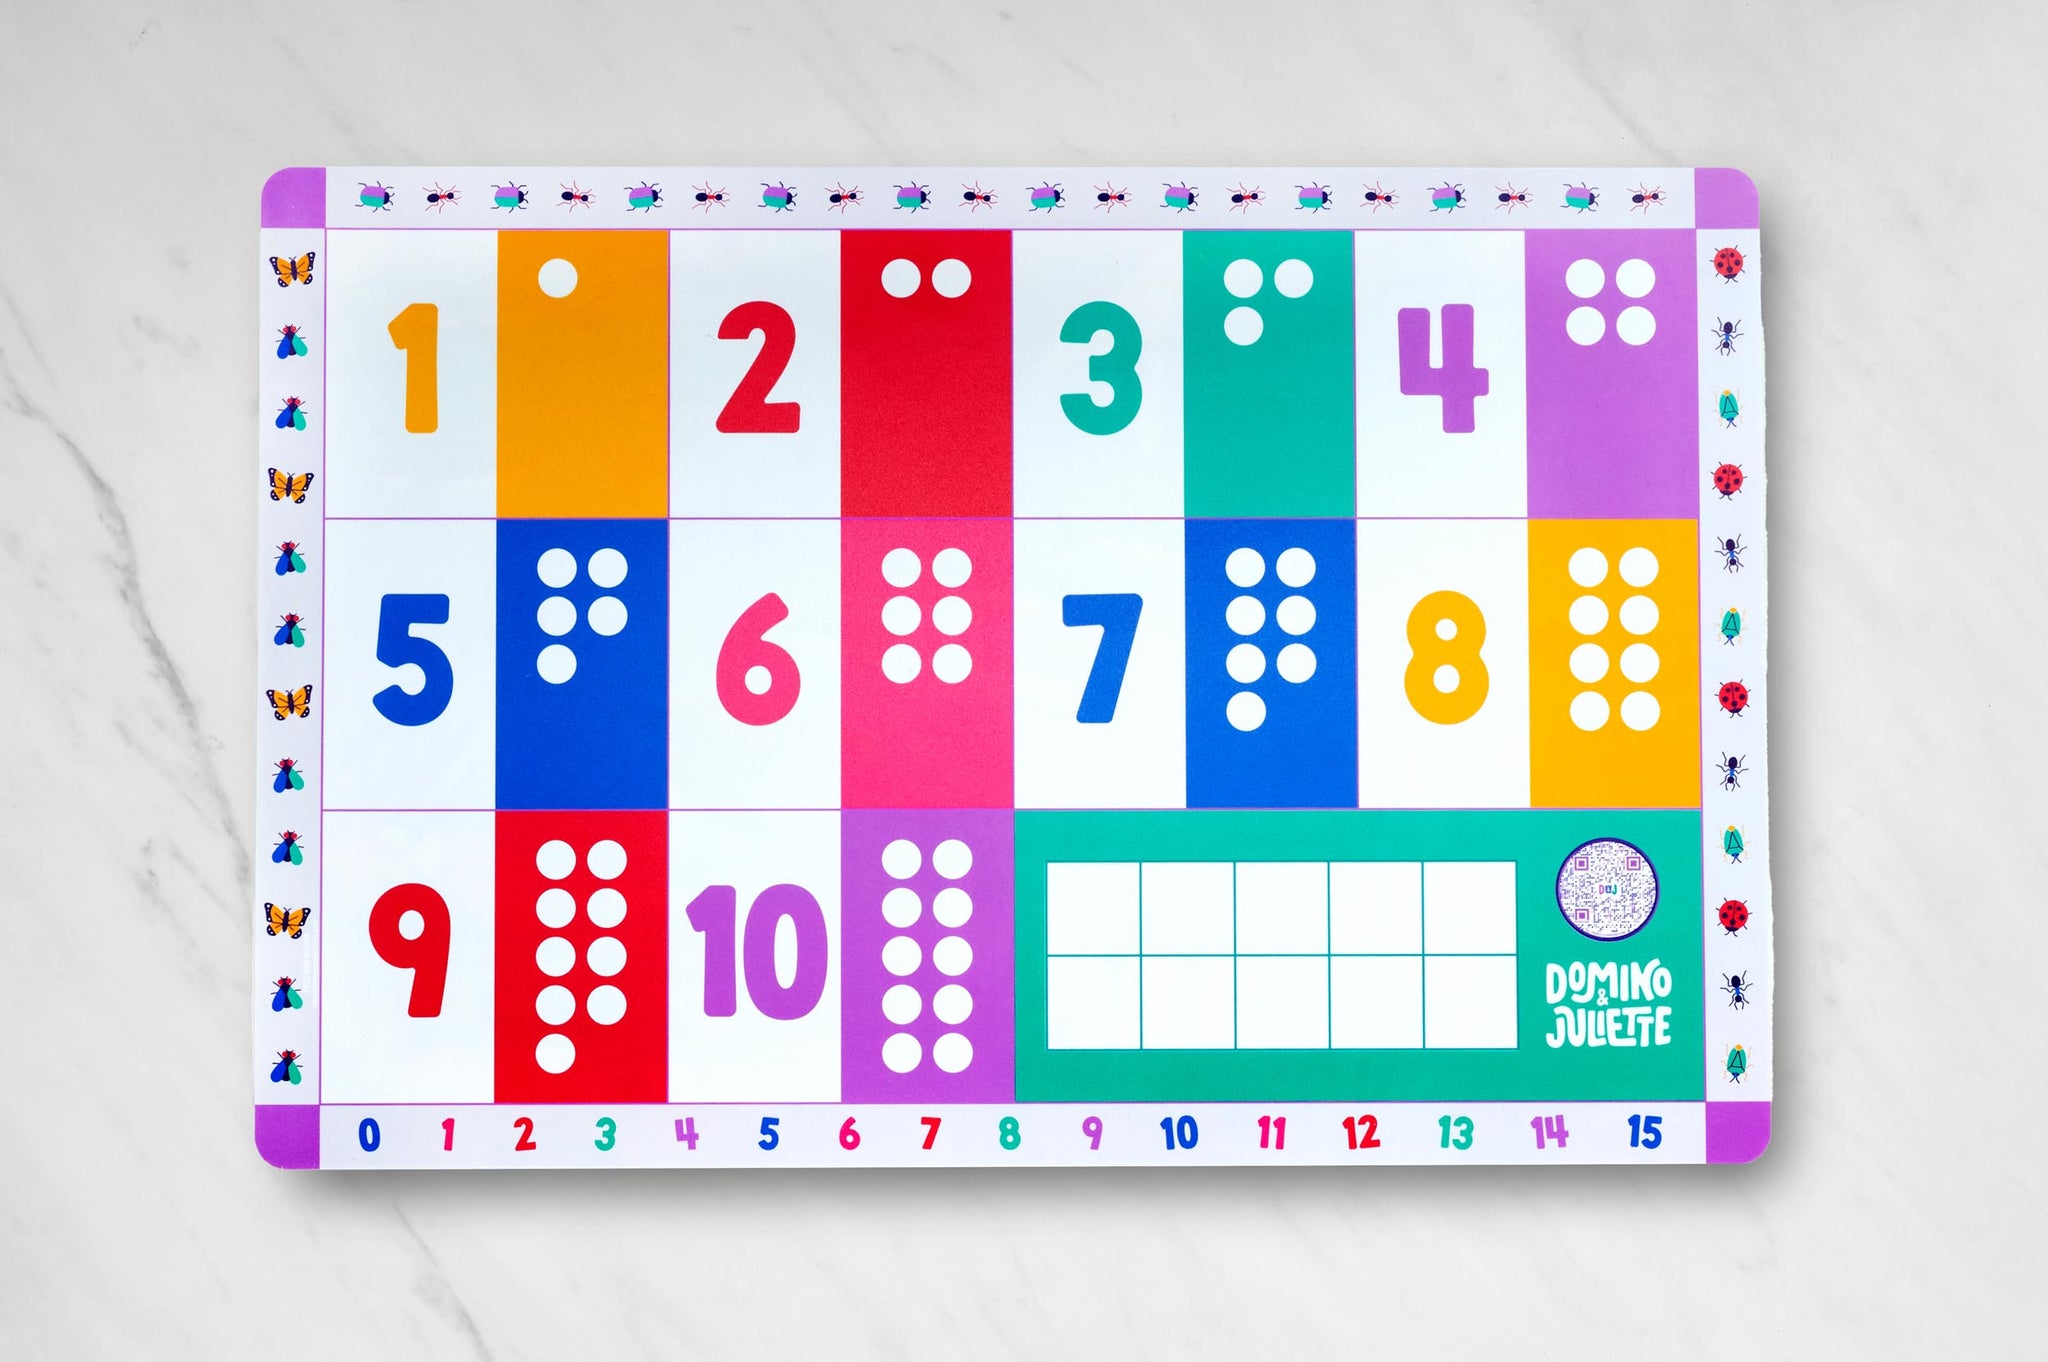 Numbers Placemat, Numbers Placemats, Number Placemat, Number Placemats, Kid plays with Numbers Placemat, Developing Early Math Skills with Numbers Placemat, Counting Placemat for Kids, Toddler playing with Placemat